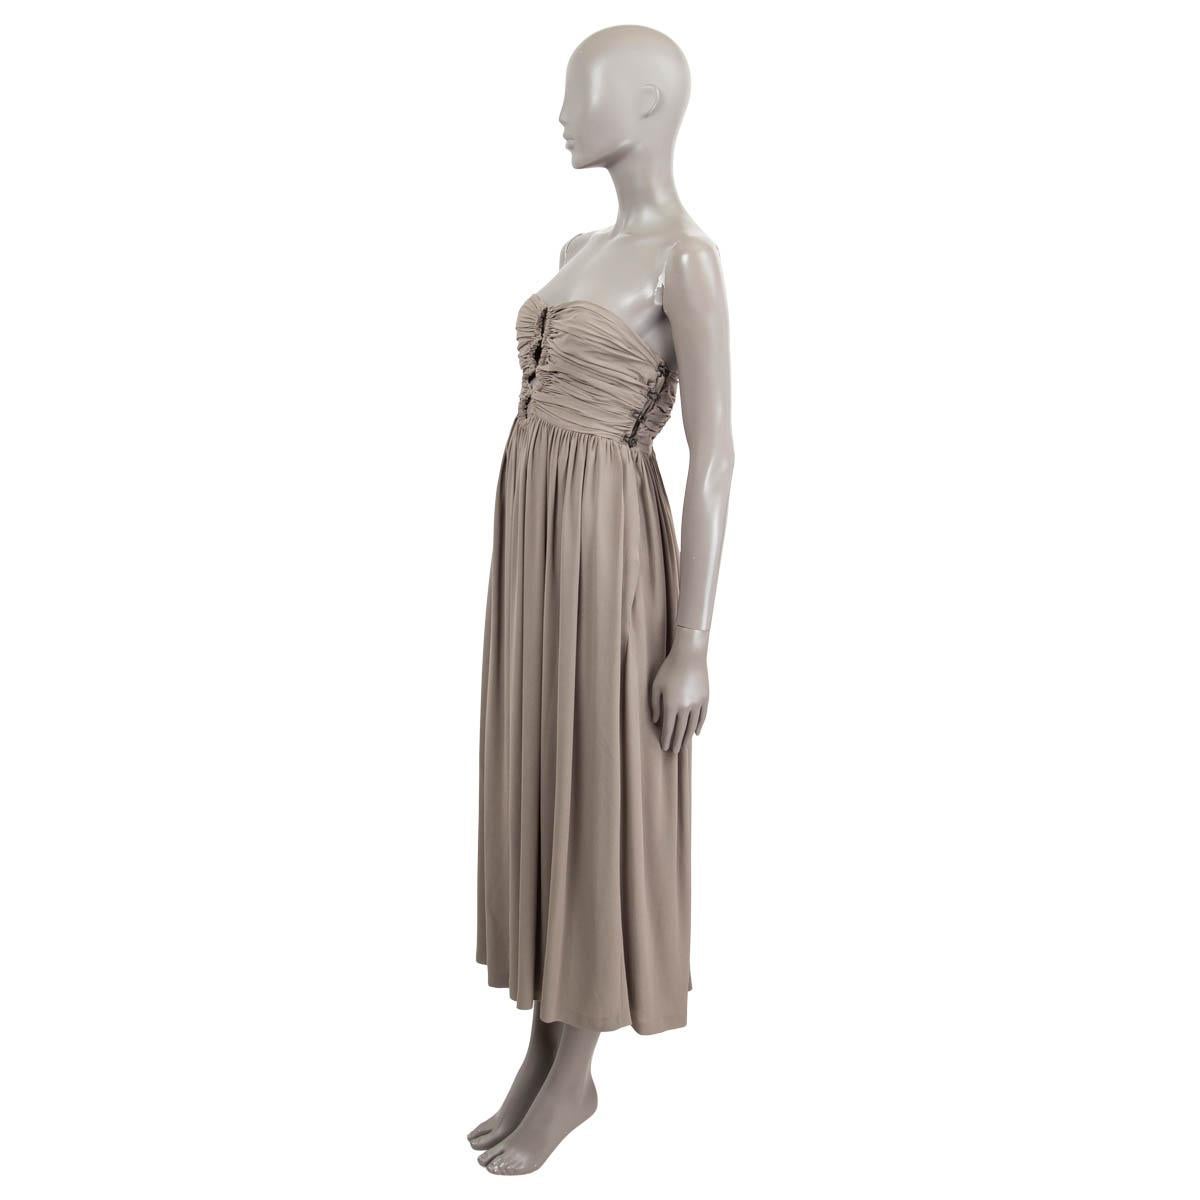 100% authentic Bottega Veneta sleeveless bustier midi dress in 100% sage silk. Opens with buttons on the left and features cut-outs on the front and back. Flared towards the back and draped details on the front of the bustier. Has been worn and is